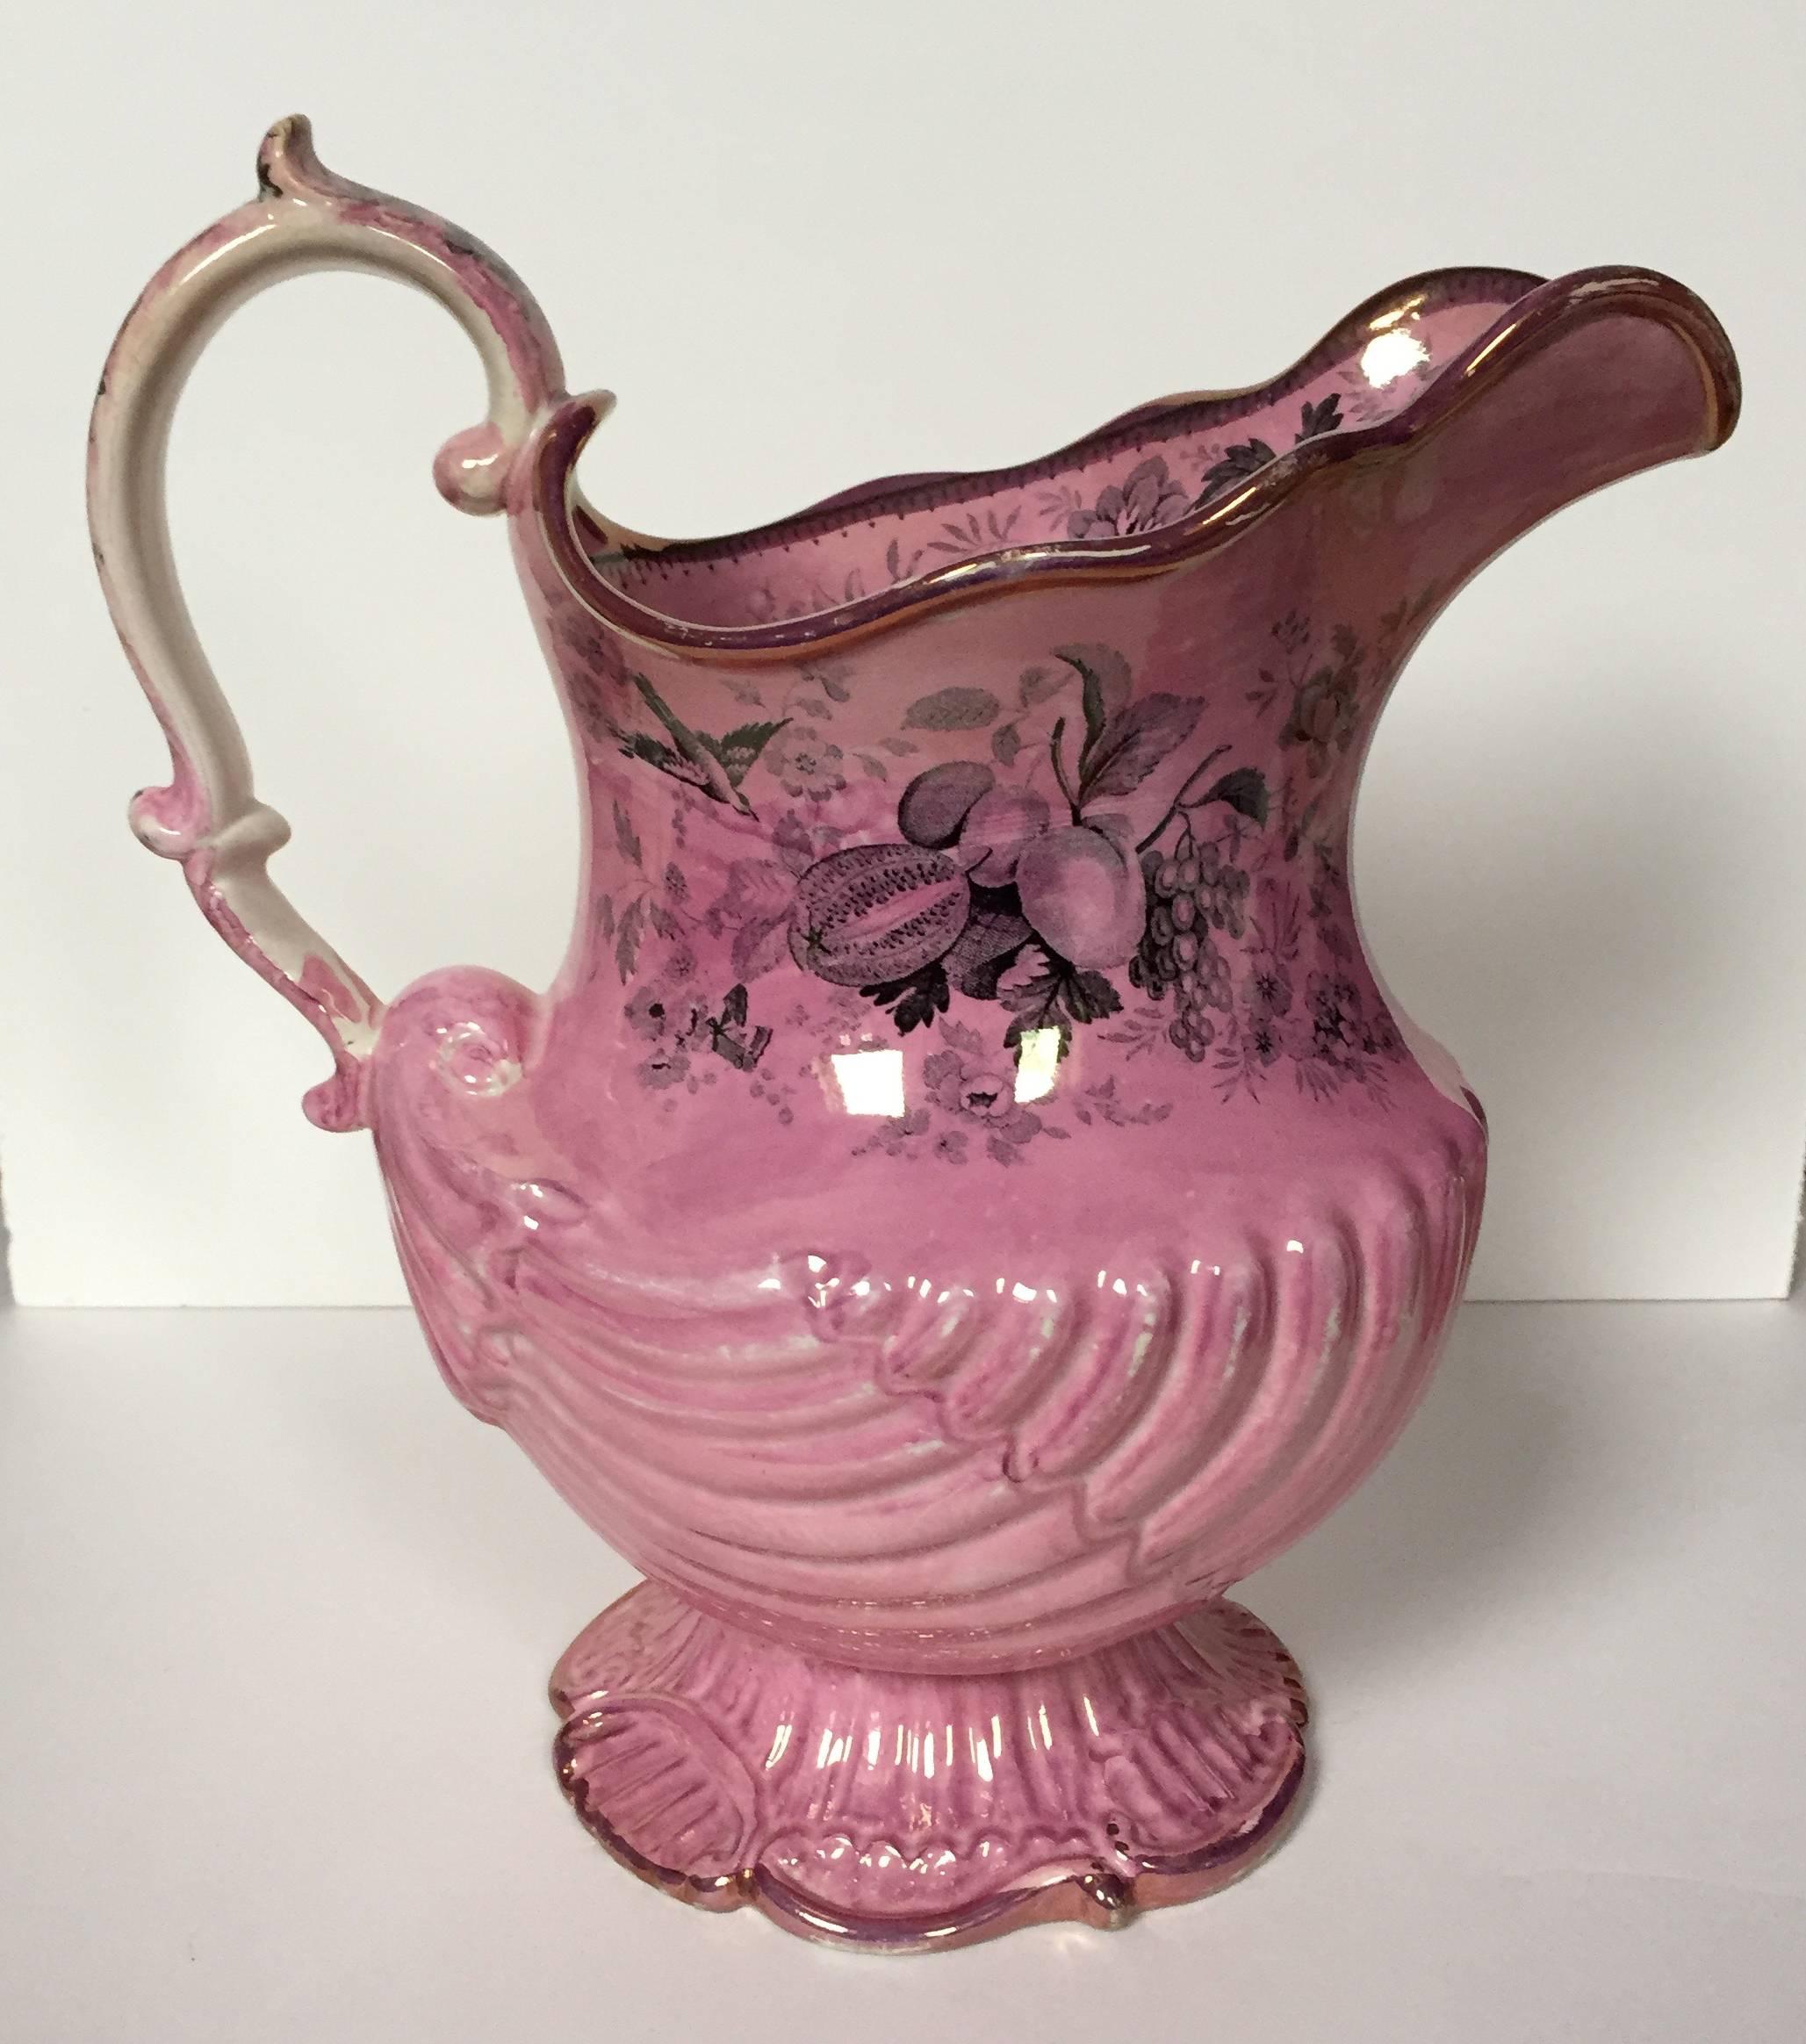 Staffordshire Pottery Transfer-Printed Pink-Lustreware Shell-Shaped Pitcher In Good Condition For Sale In Brooklyn, NY